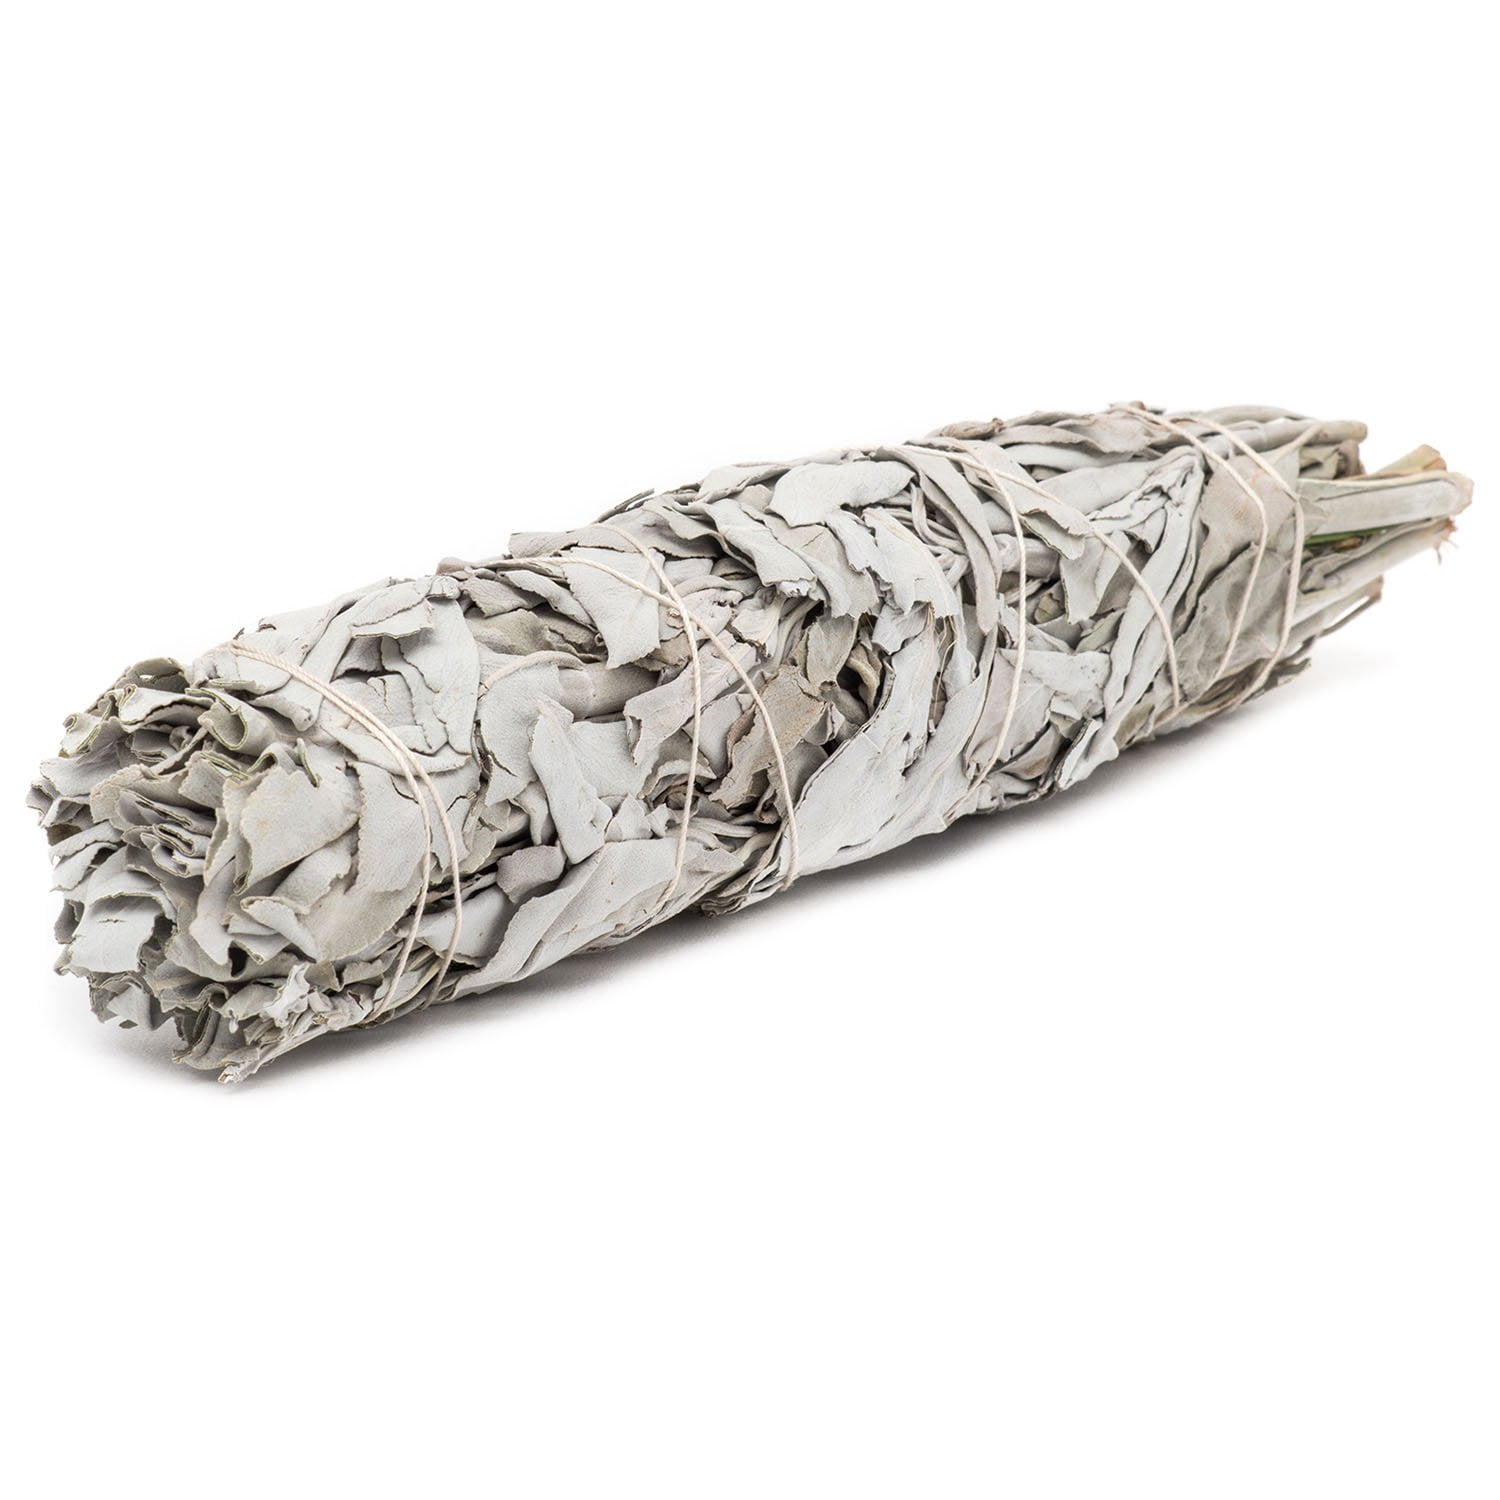 2 Pack Premium California White Sage Smudge Sticks, Approx 6 Inch, Made in USA